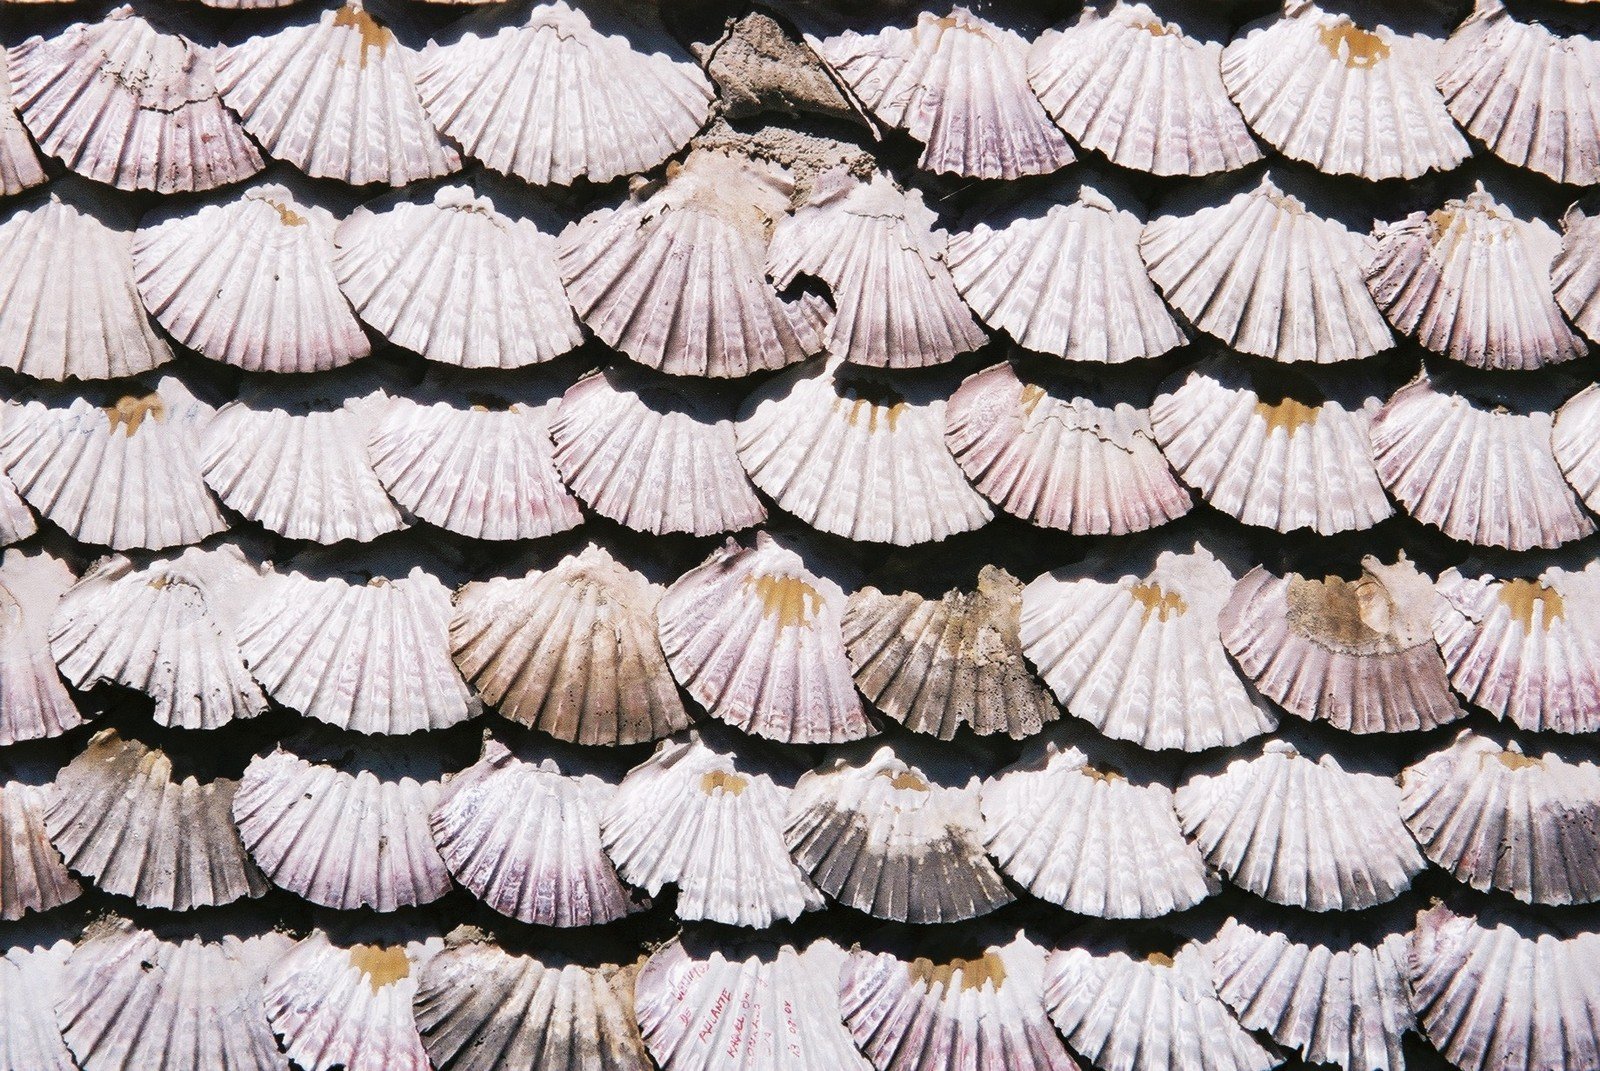 rows of sea shells are seen on a tile wall